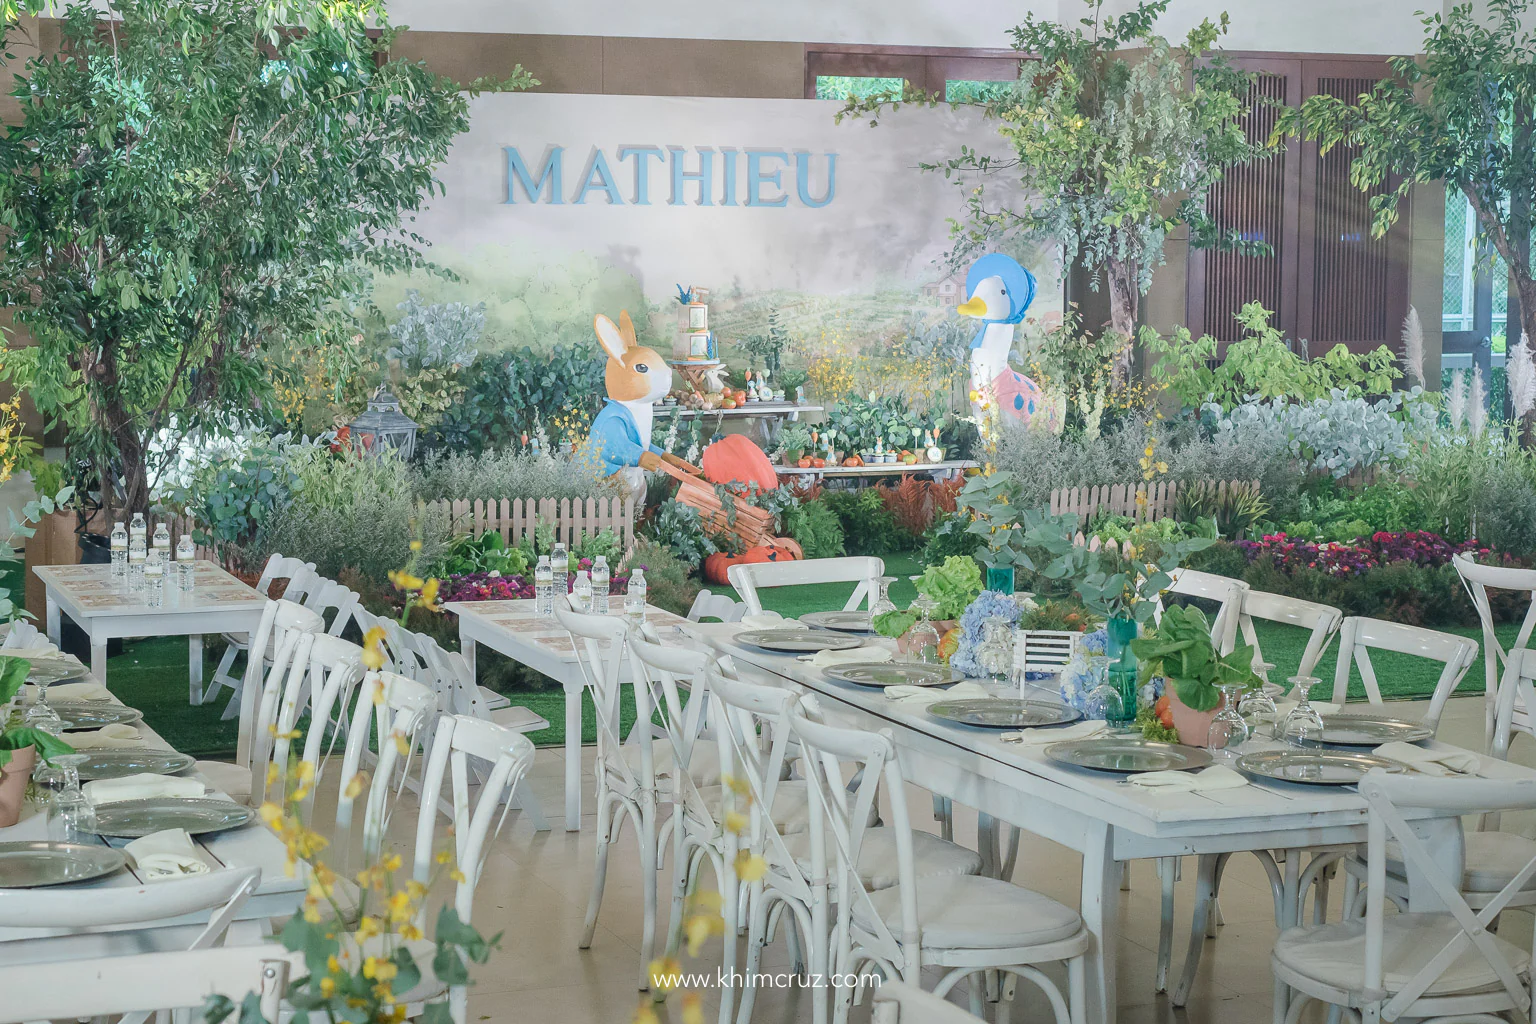 McGregors garden with trees and fresh produce vegetables Peter Rabbit themed birthday party celebration by Khim Cruz